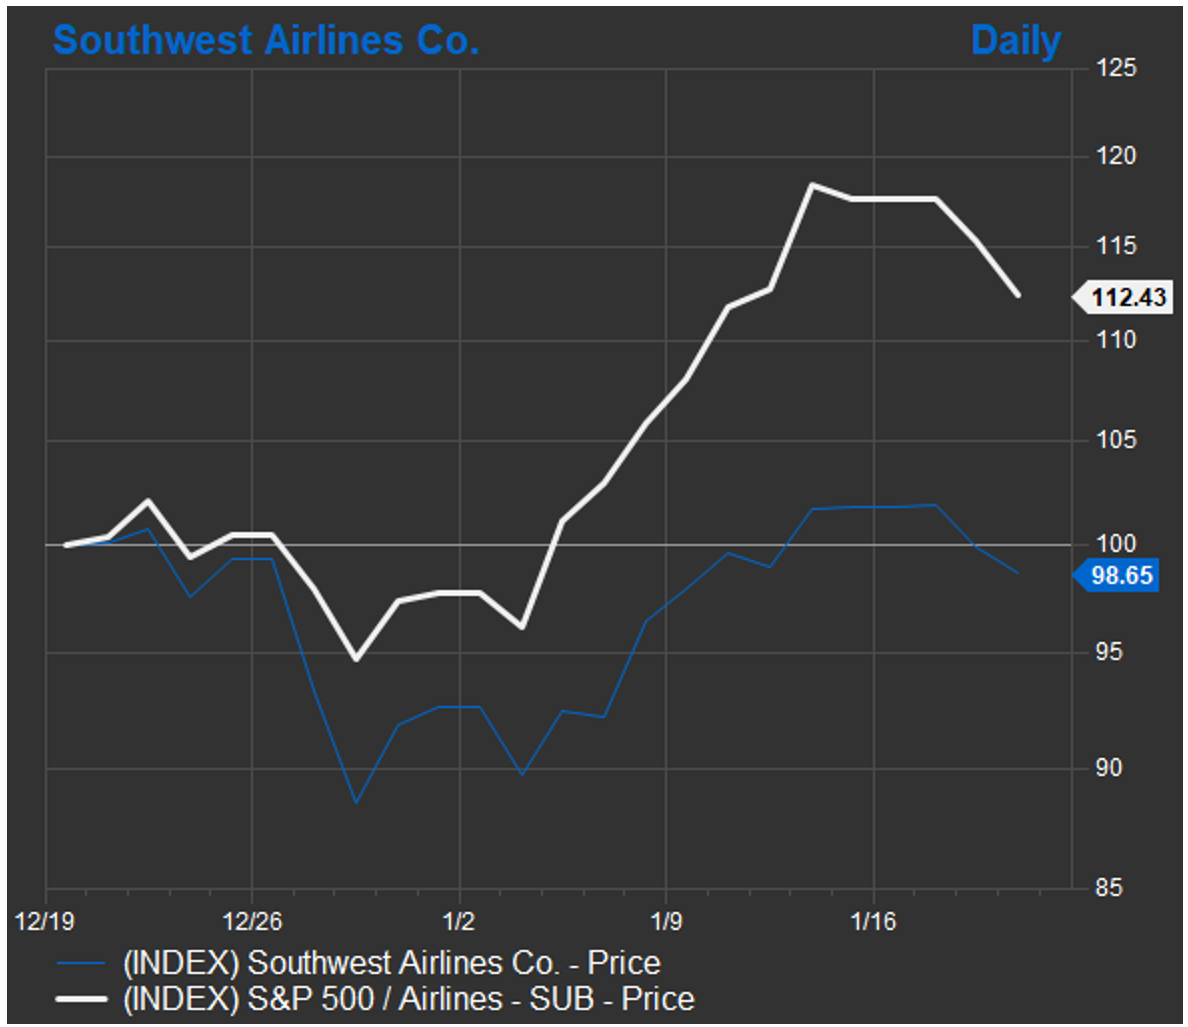 figure-1-southwest-airlines-share-price-indexed-compared-to-sp-500-airlines-index-source-factset